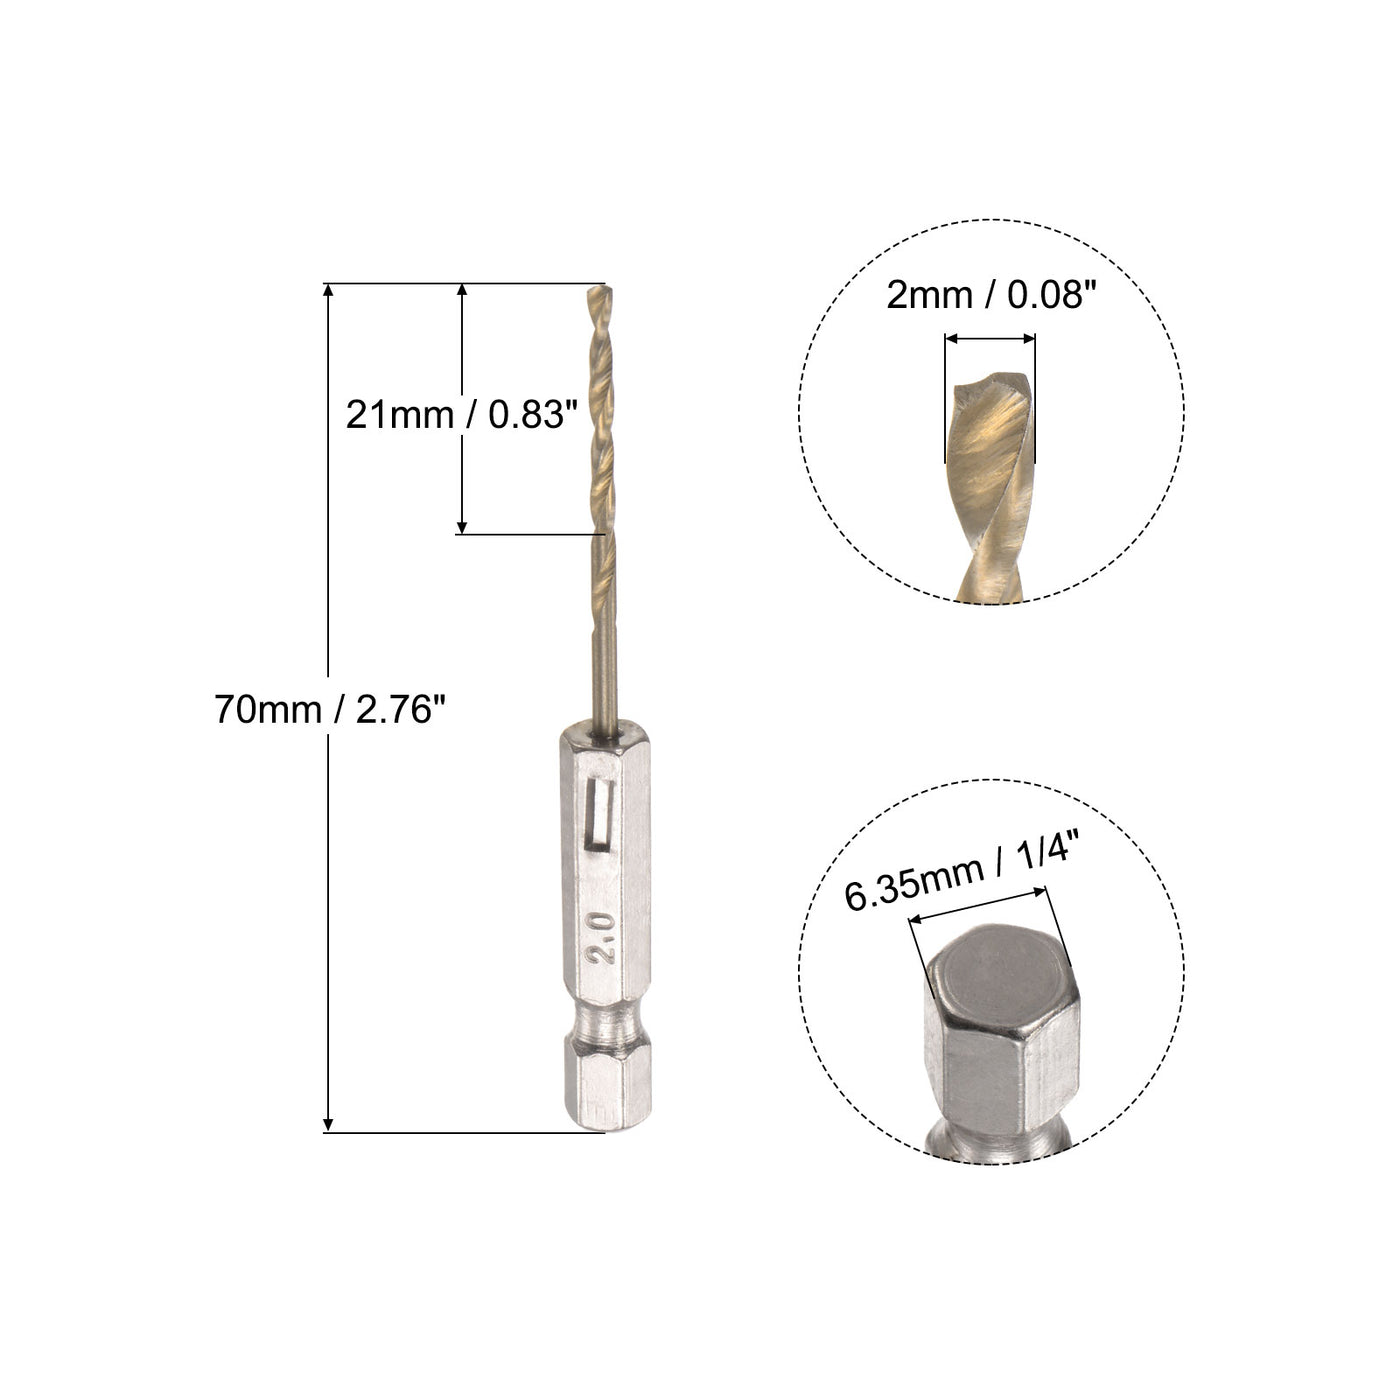 uxcell Uxcell 2mm High Speed Steel Twist Drill Bit with Hex Shank 70mm Length